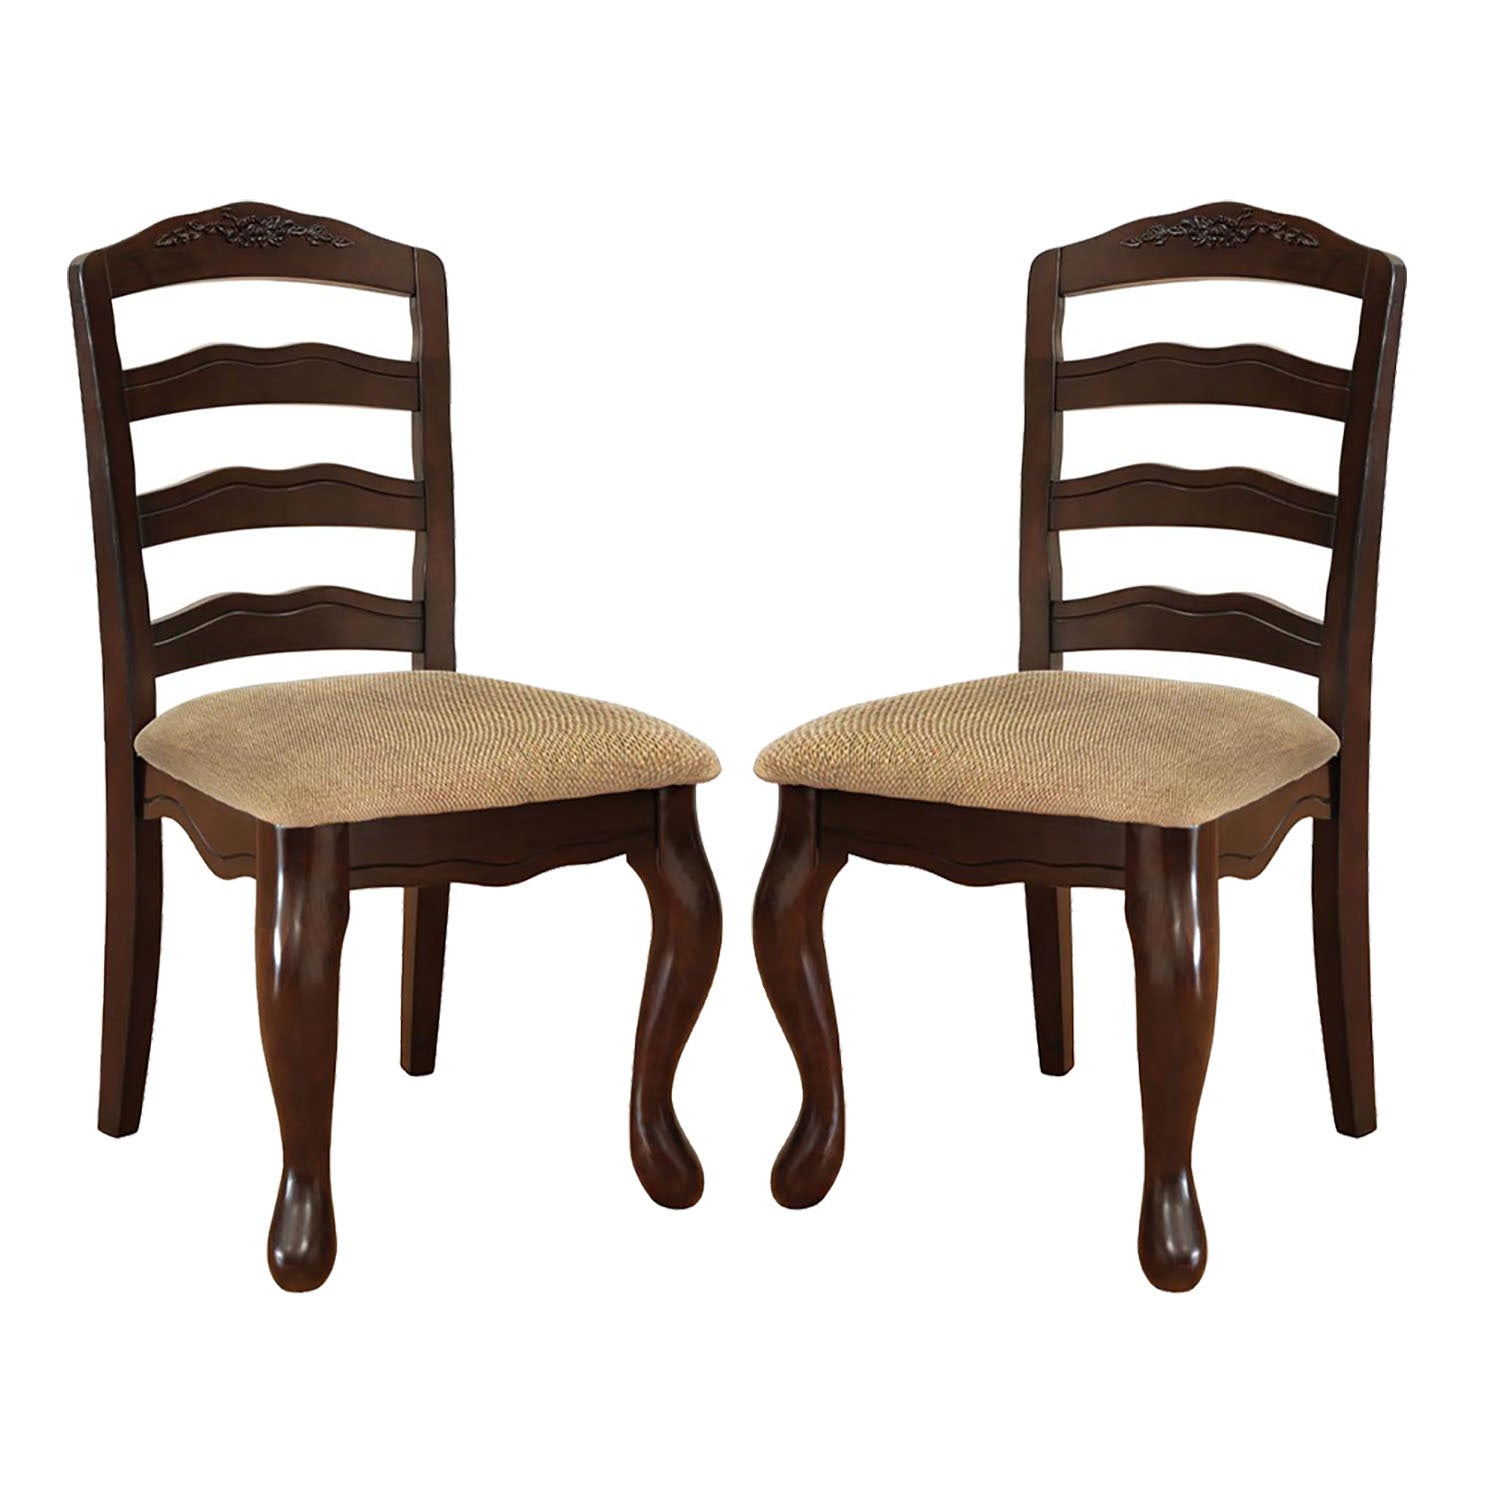 Set of 2 Fabric Padded Seat Dining Chairs in Dark solid-walnut-dining room-dining chairs-ladder